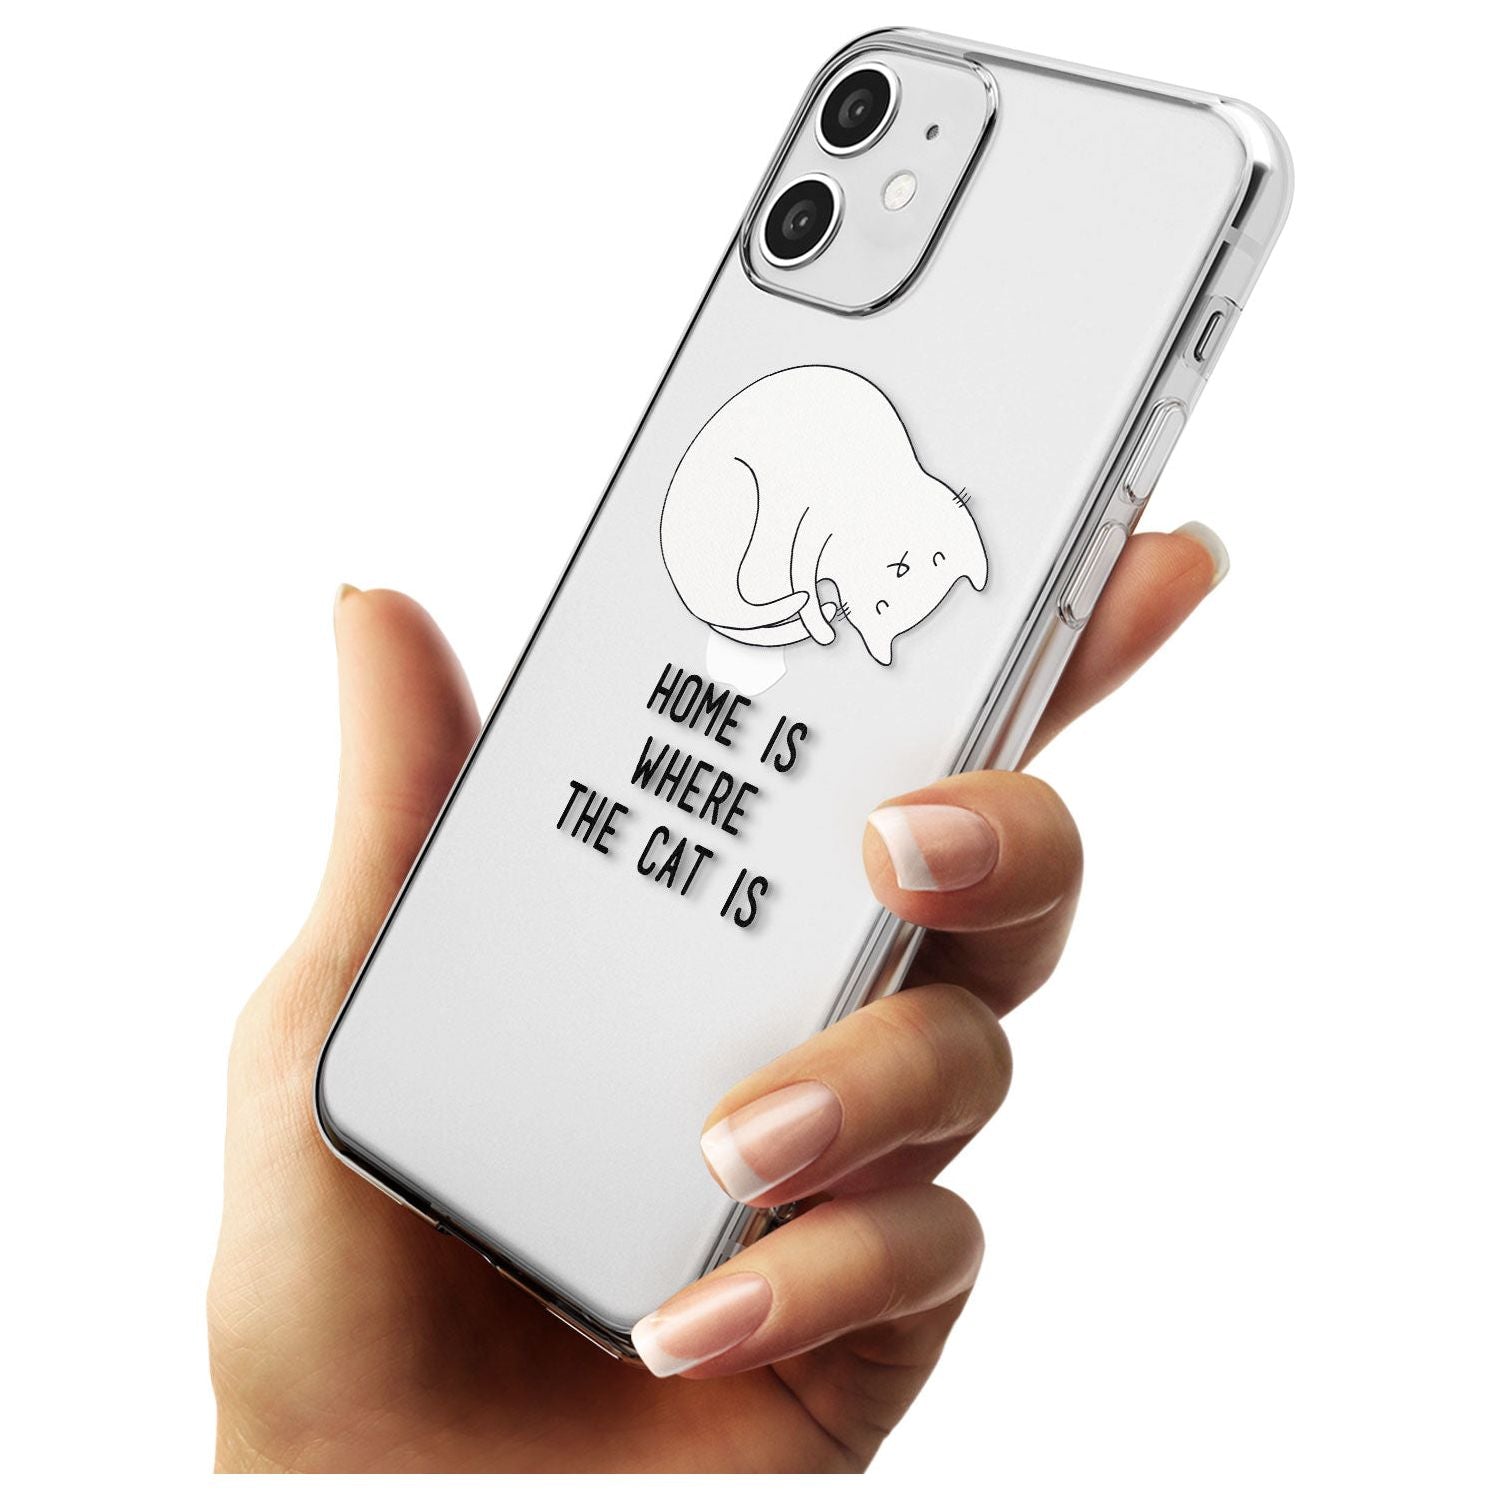 Home Is Where the Cat is Black Impact Phone Case for iPhone 11